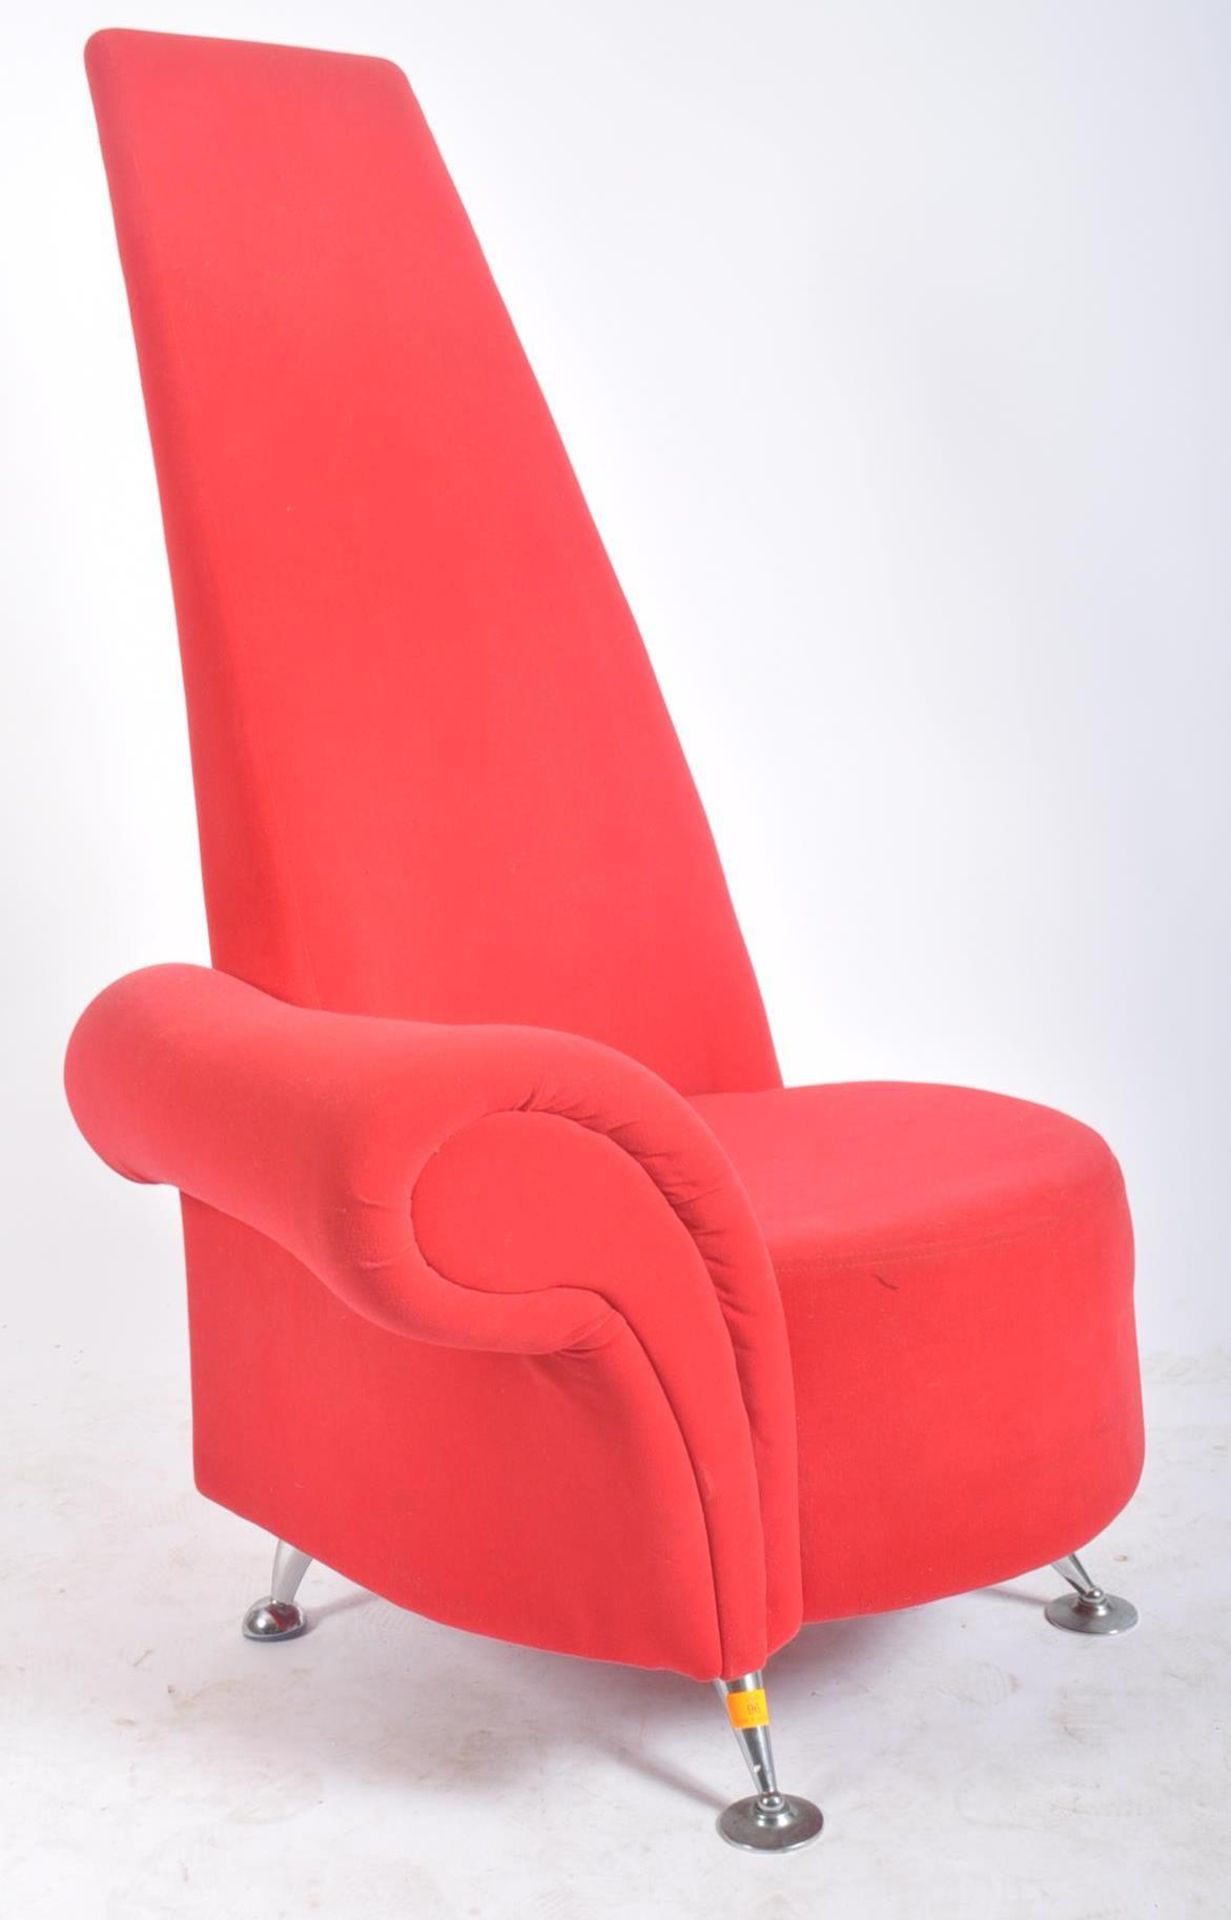 POTENZA CHAIR - CONTEMPORARY HIGH BACK ARMCHAIR - Image 2 of 7